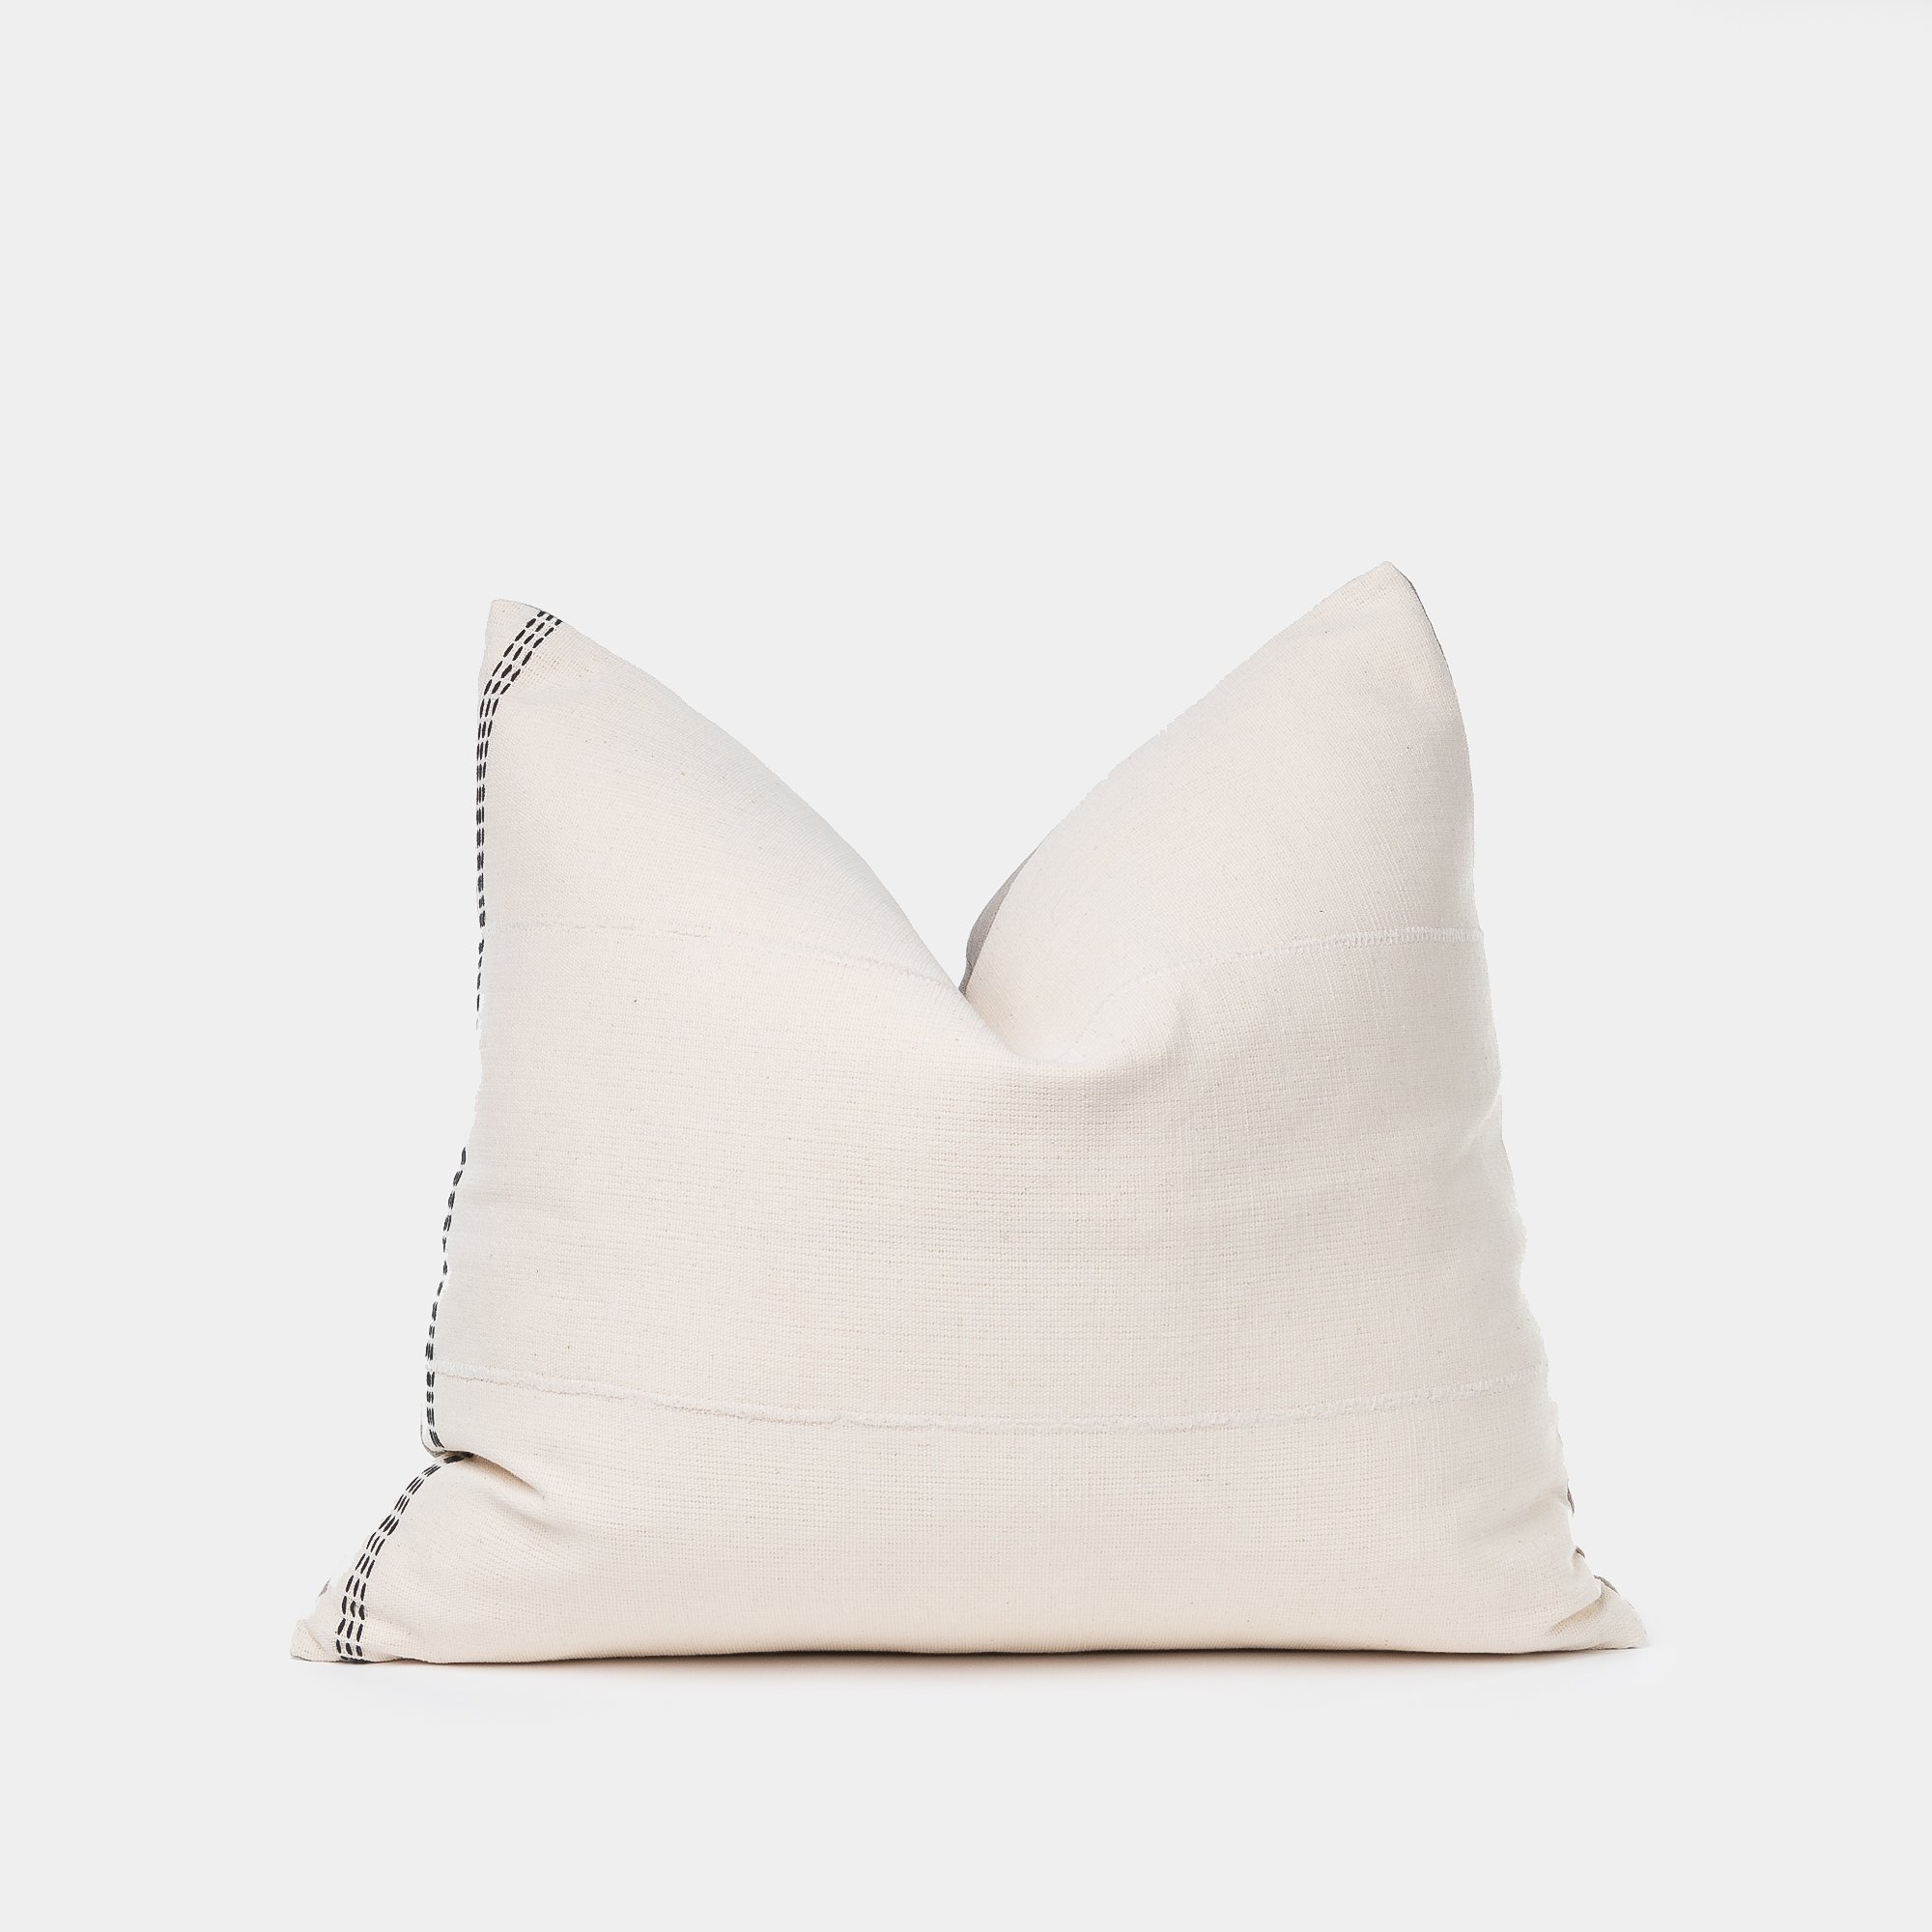 ALL-SORTS-OF-SHOPPE-BULOW-PILLOW